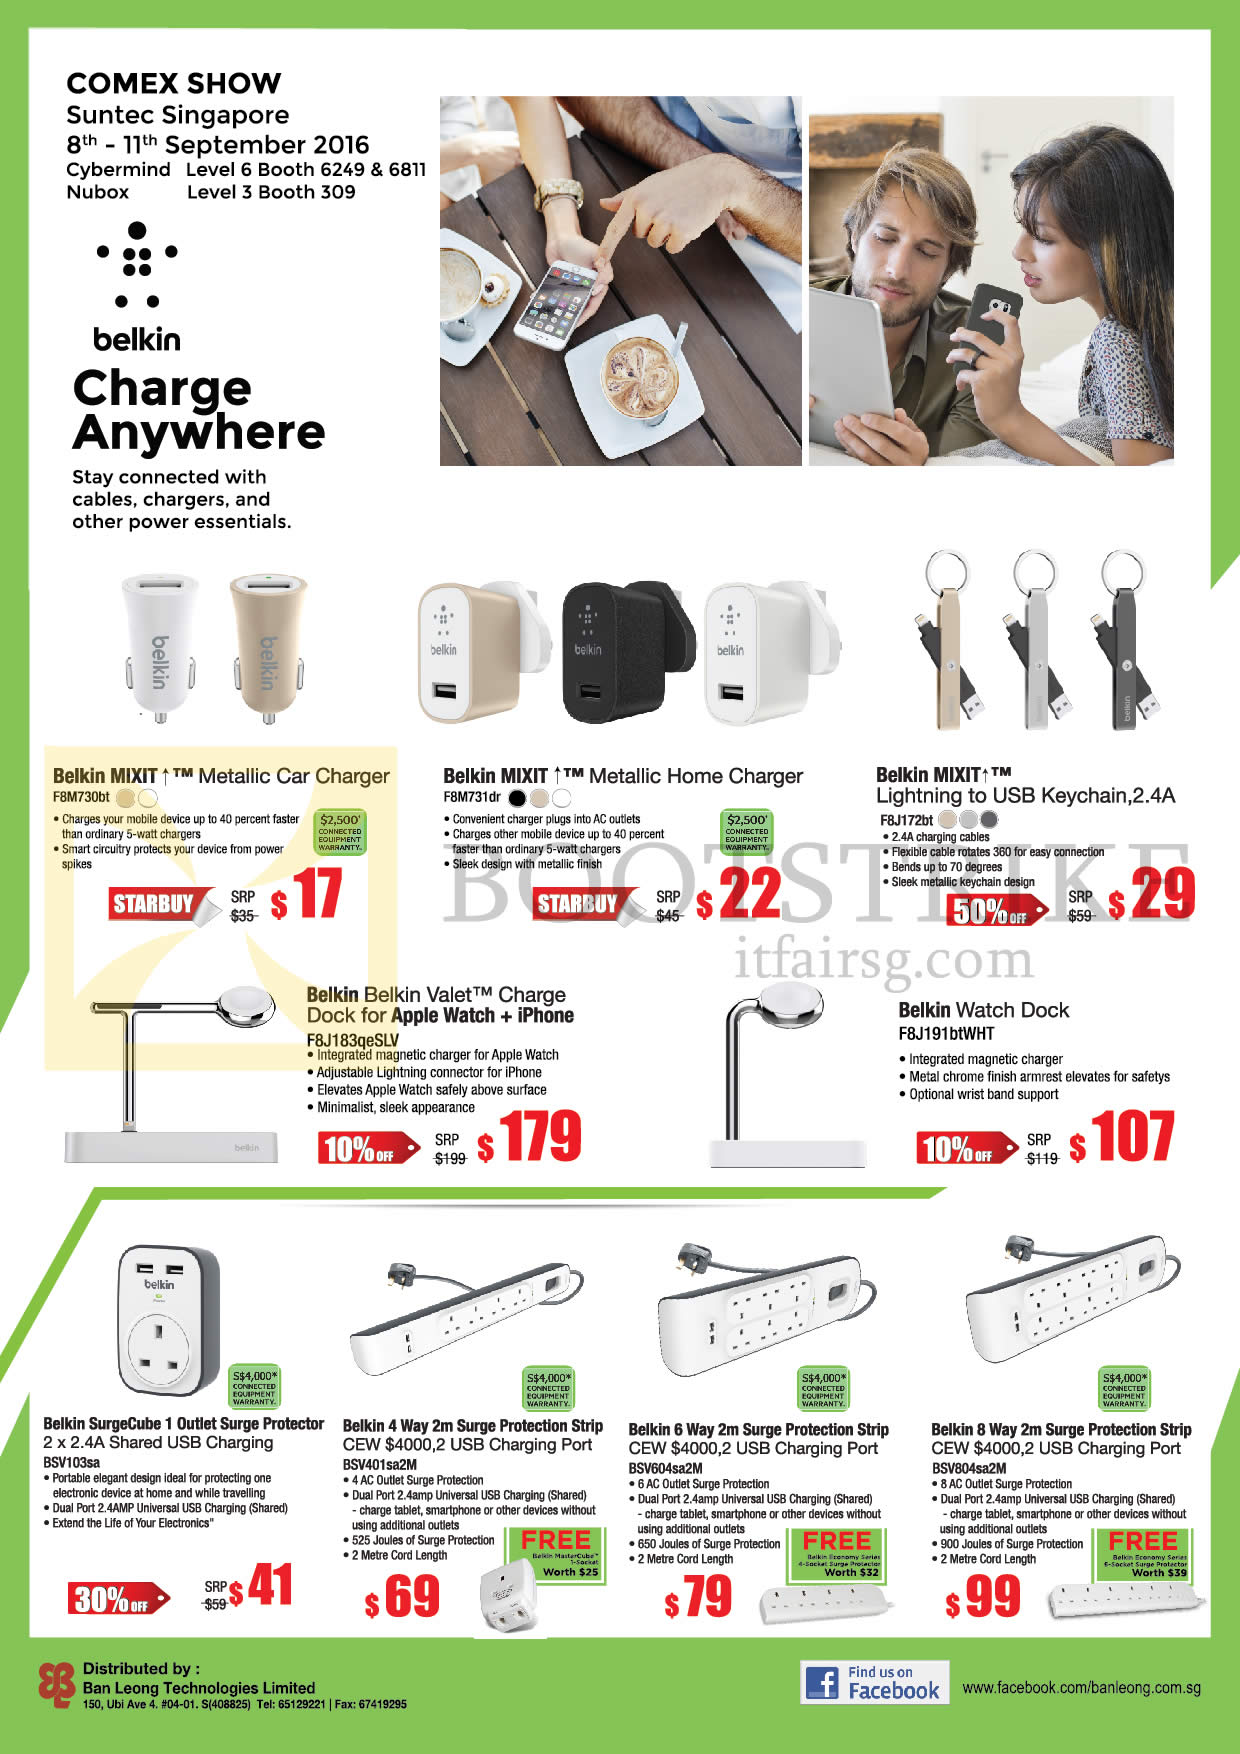 COMEX 2016 price list image brochure of Belkin Chargers, Surge Protectors, Mixit, Valet Charge, Watch Dock, SurgeCube 1 Outlet Surge Protector, Surge Protection Strip